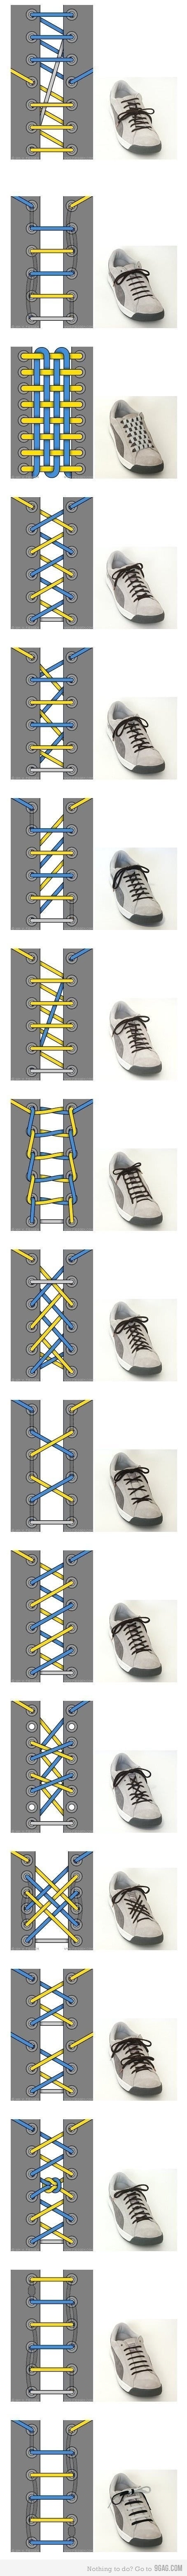 17 Ways To Tie Your Shoes